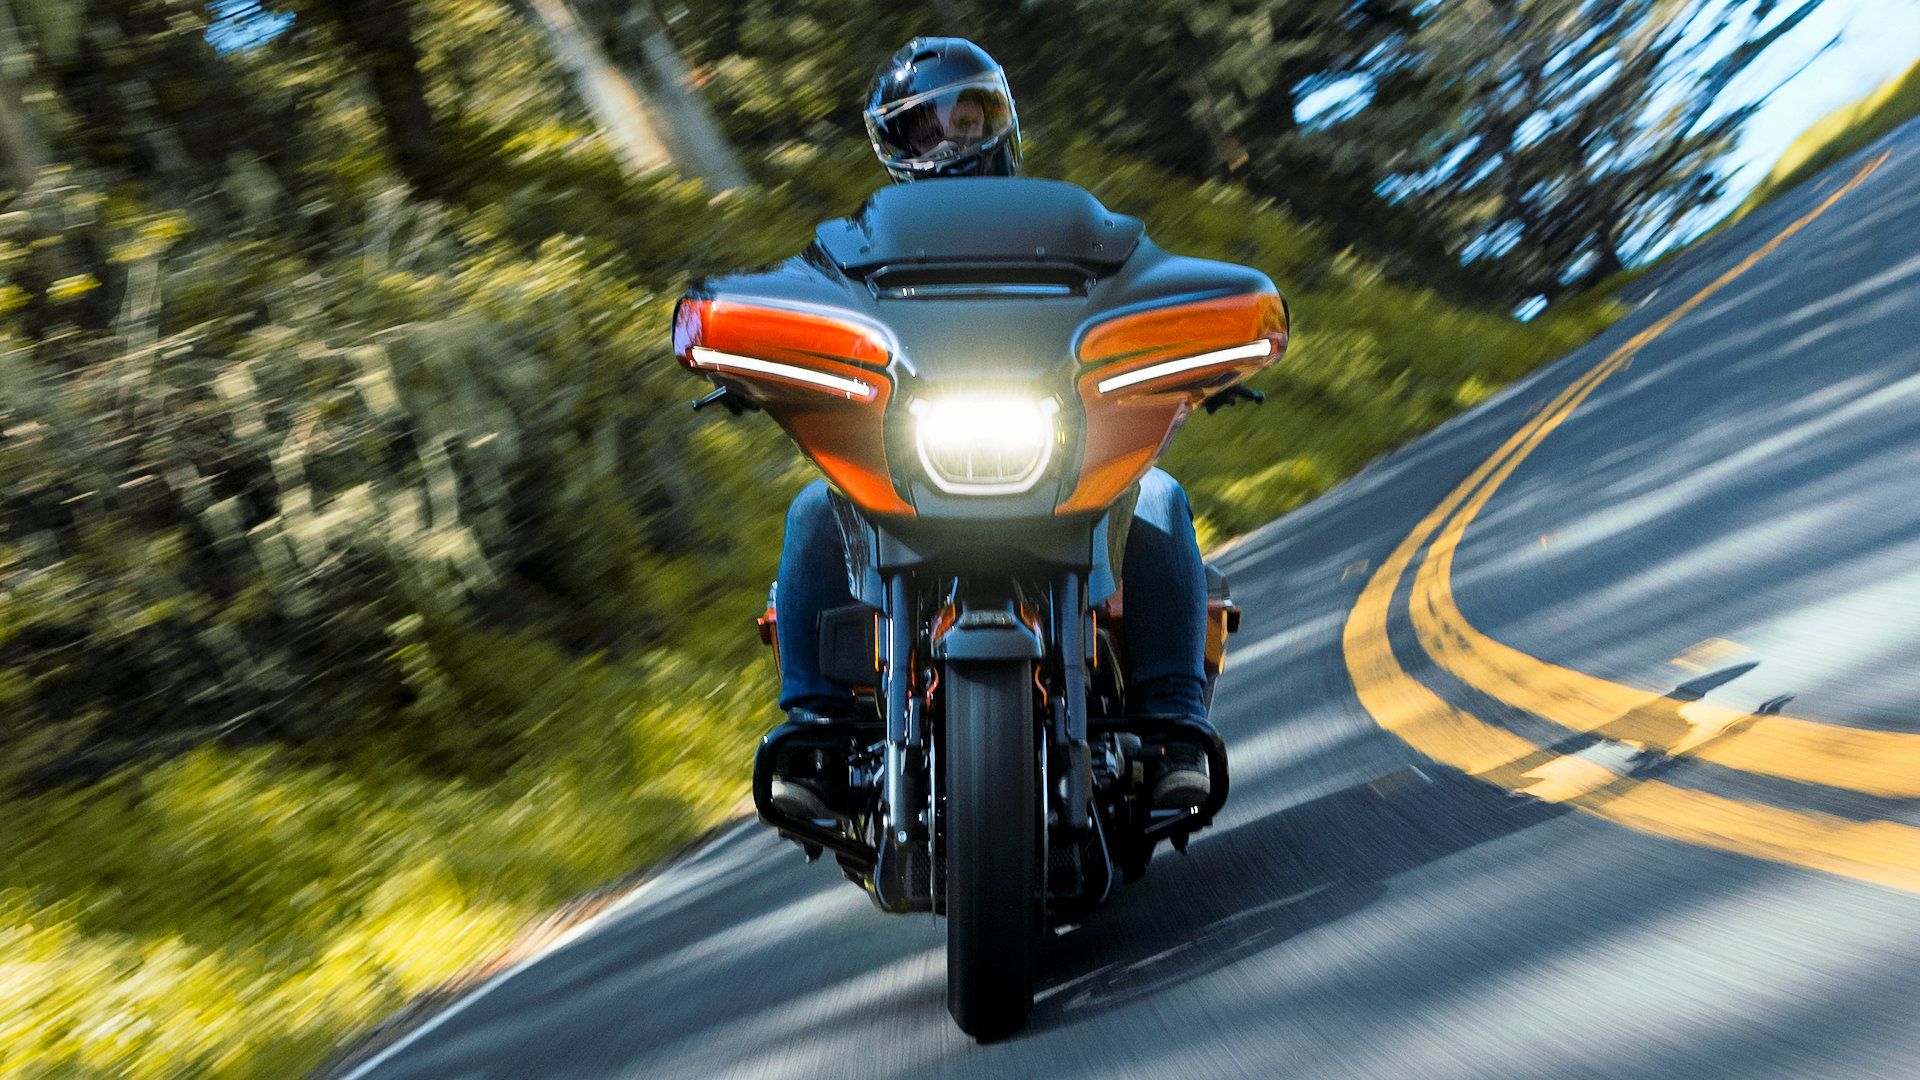 2023 Harley-Davidson CVO Street Glide headon coming out of a curve